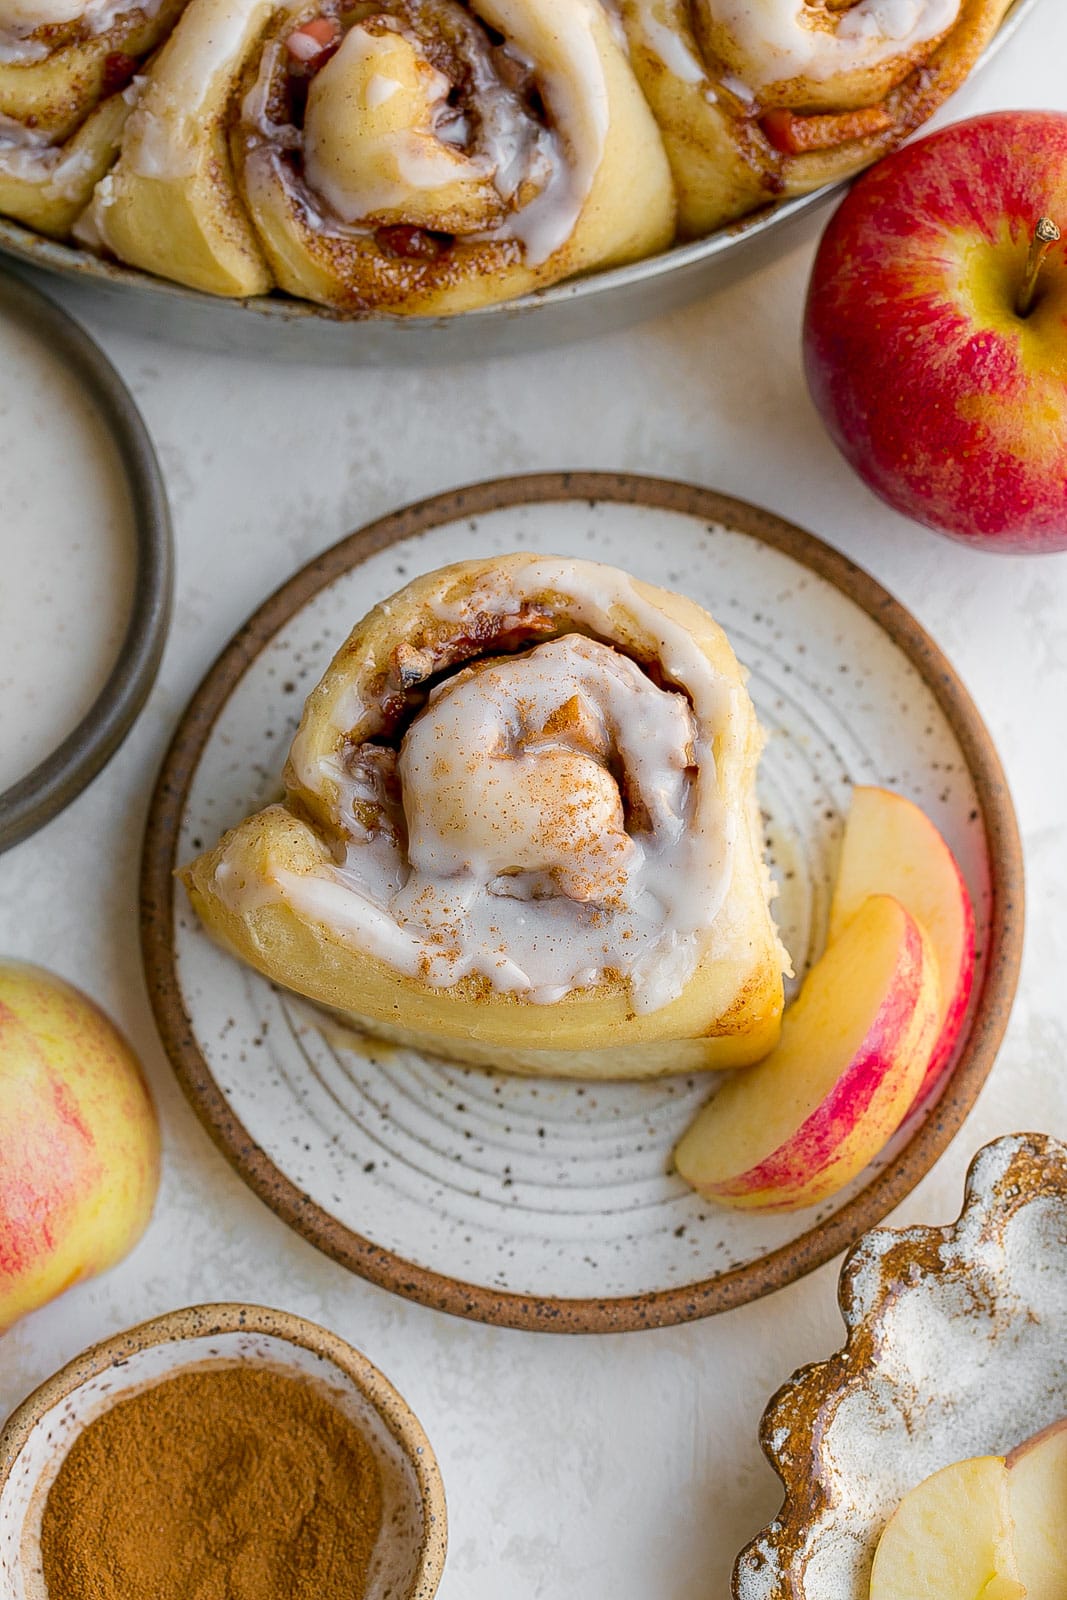 Cinnamon roll with apple pie filling.